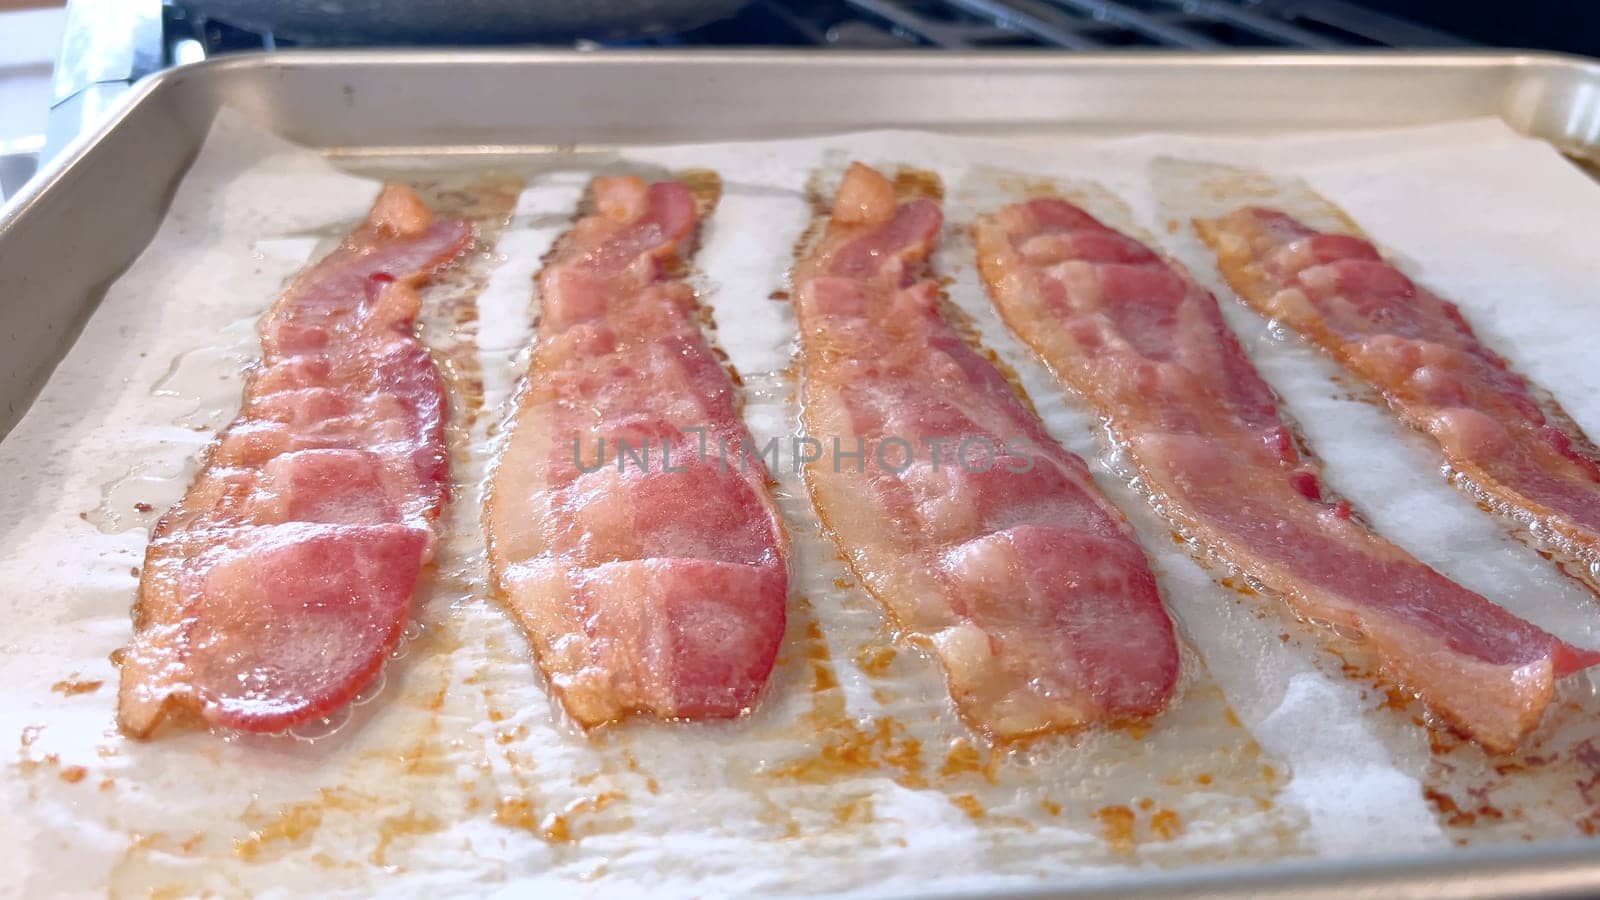 Sizzling Bacon Strips Baking on a Parchment-Lined Tray by arinahabich